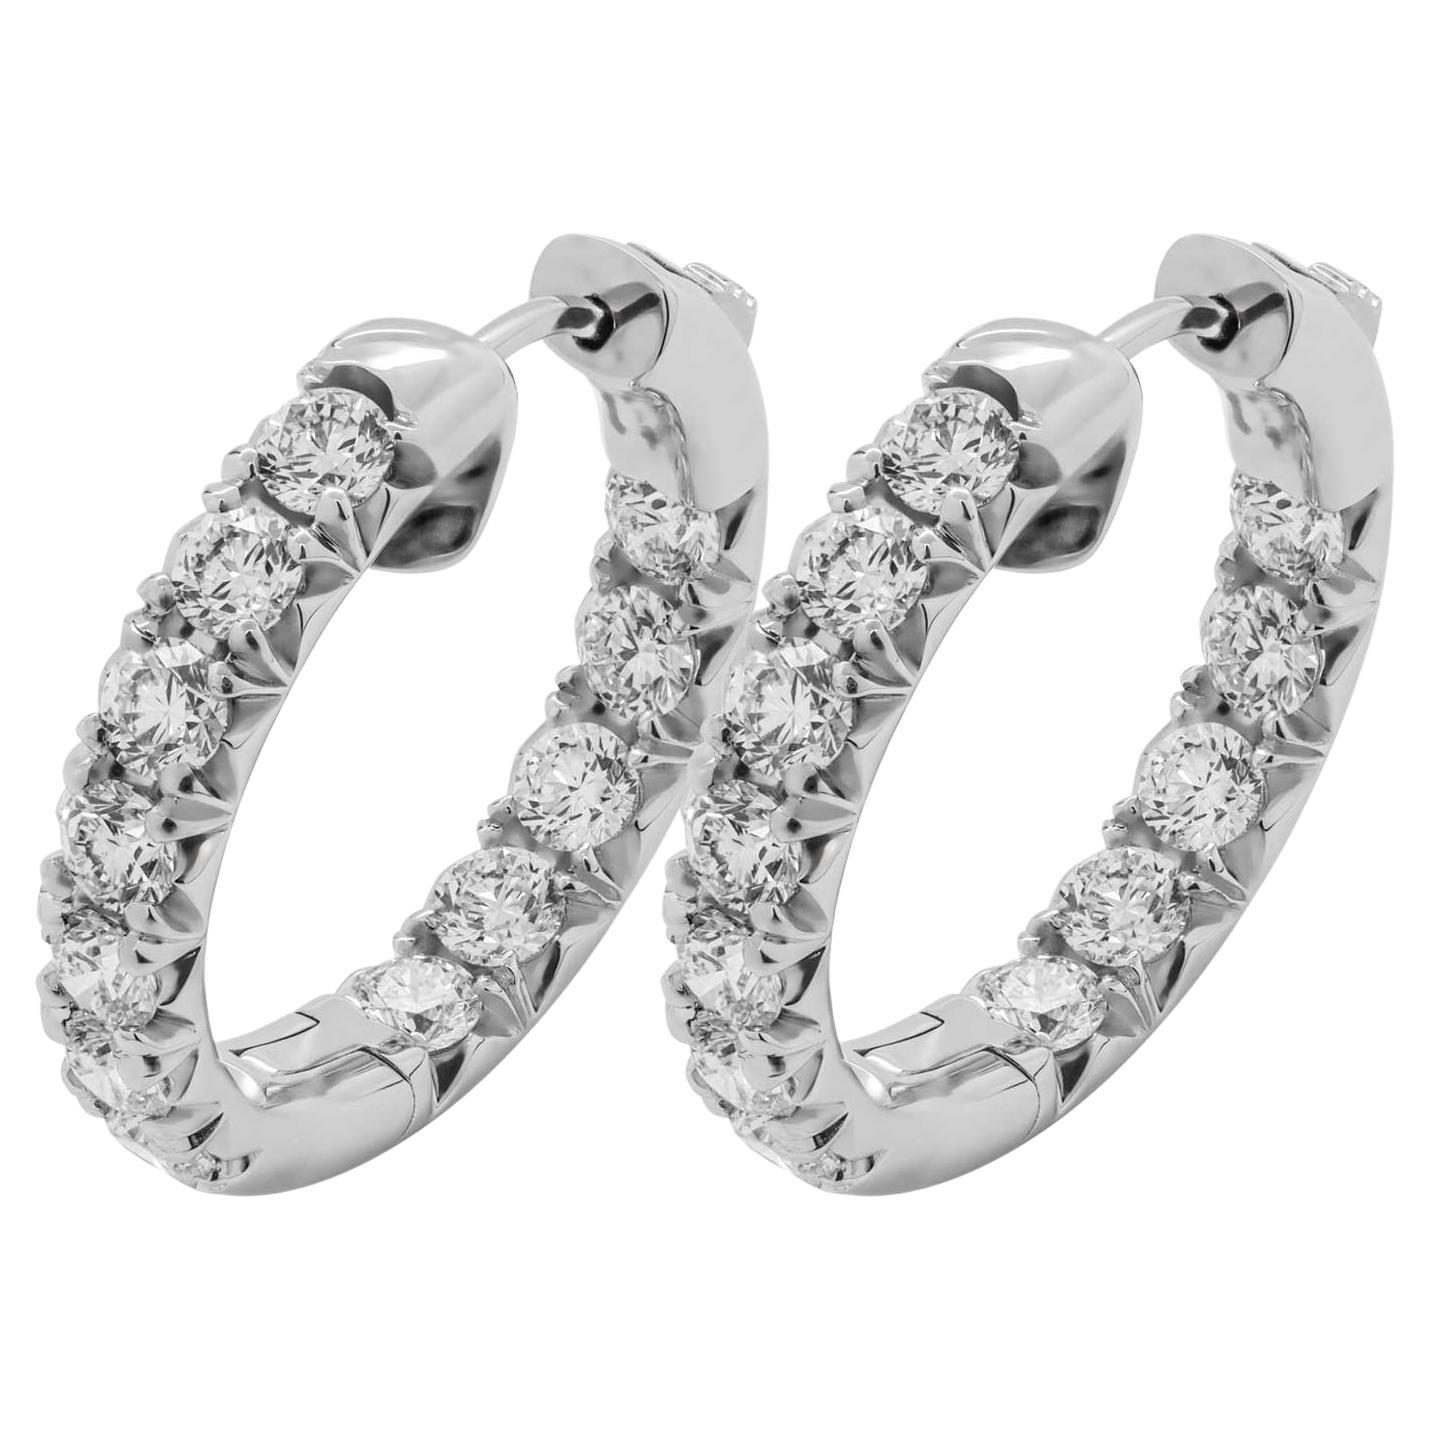 Diamond Hoop Earrings in White Gold with 4.7ct For Sale